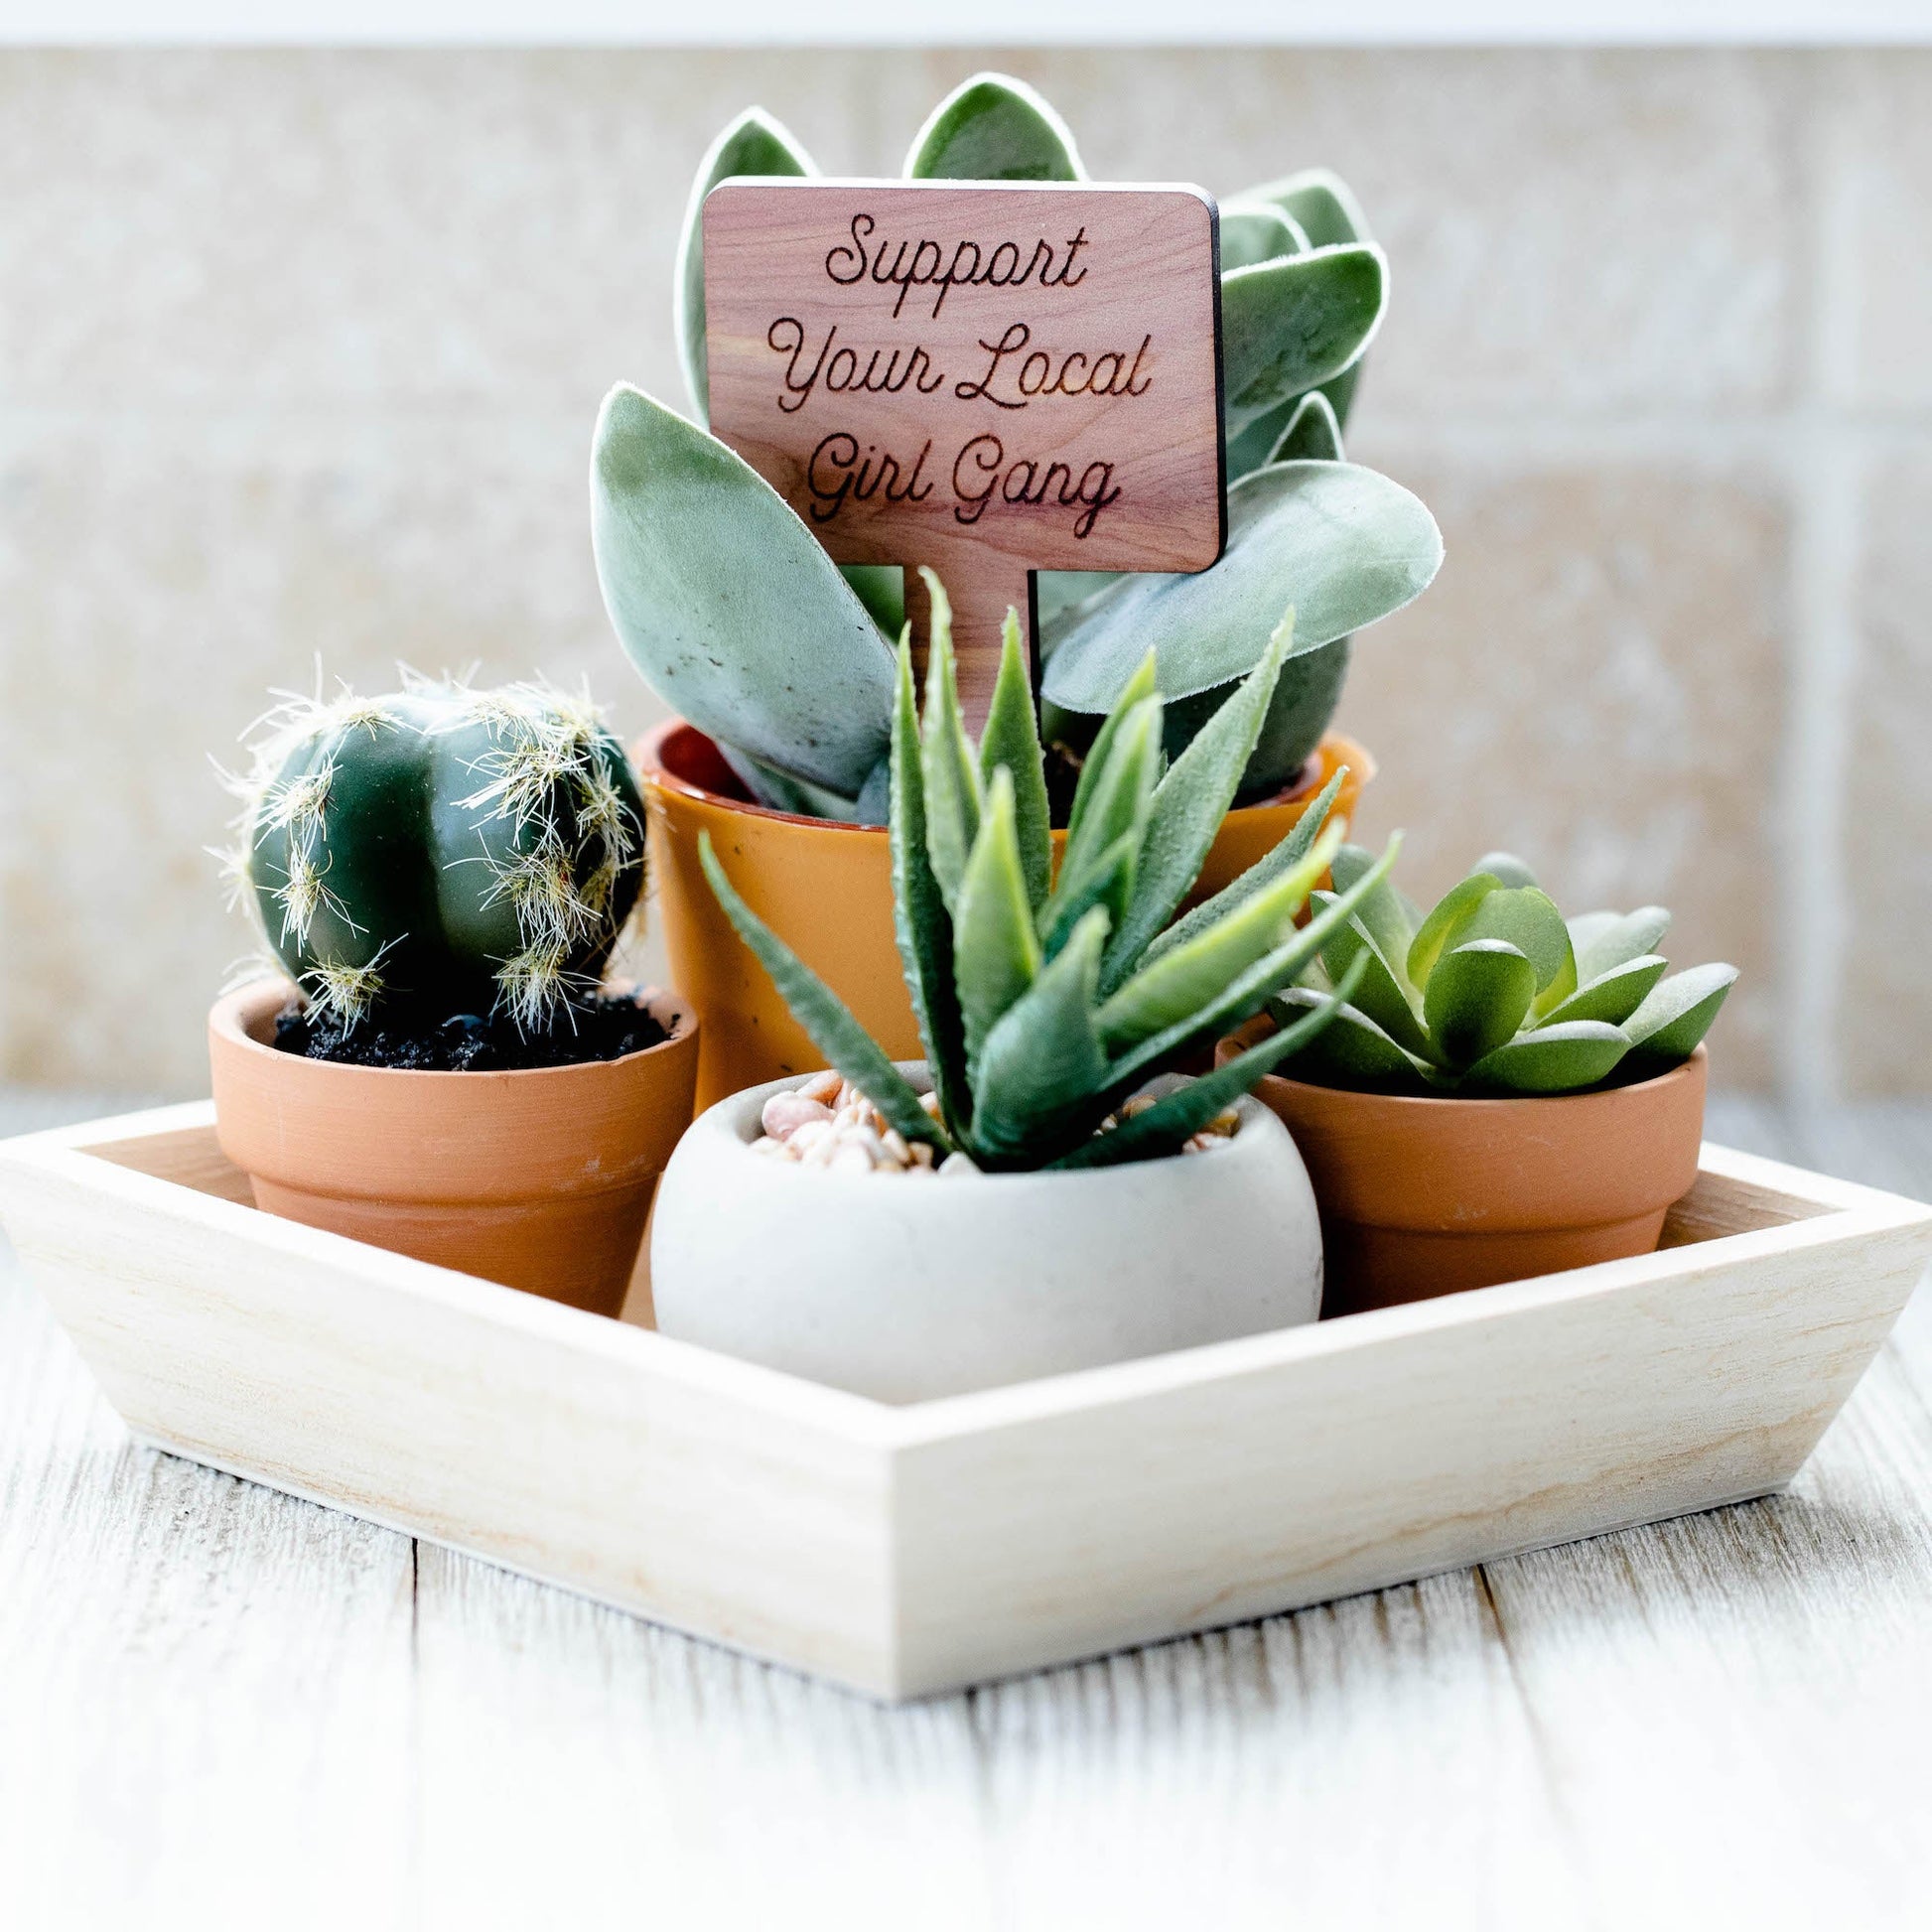 Plant Tags - Cedar Wood - "Support Your Local Girl Gang" - by LeeMo Designs in Bend, Oregon